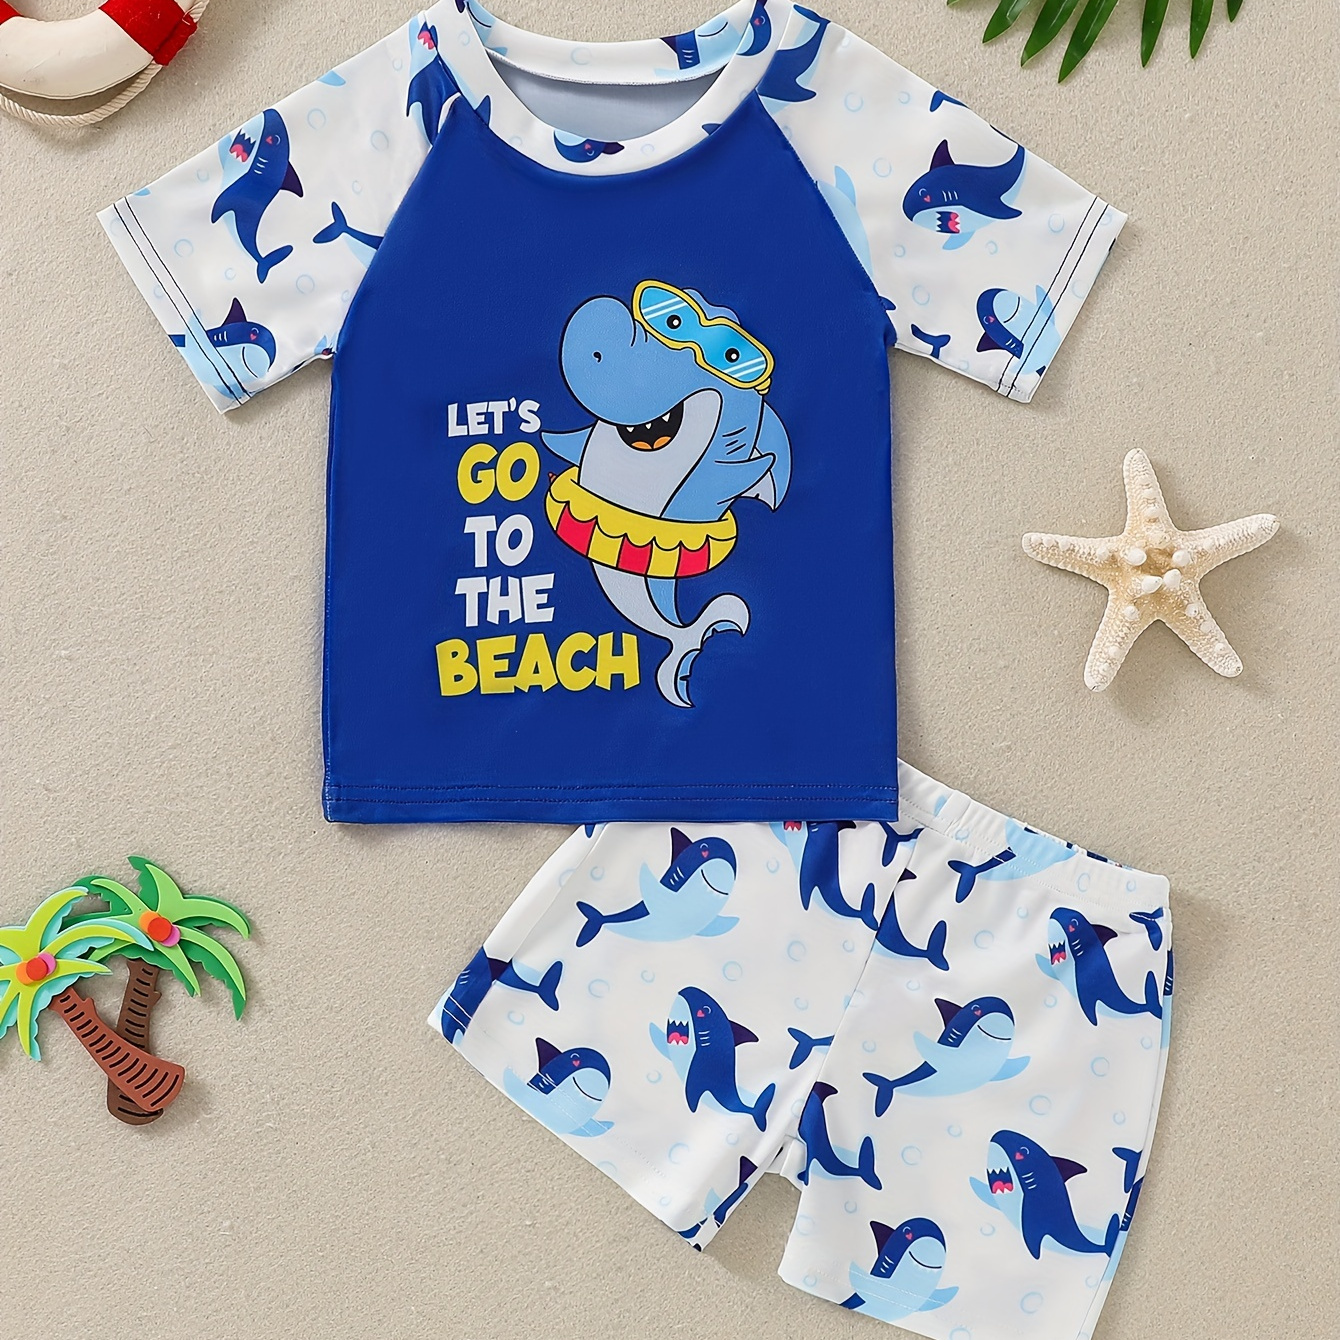 

Boys Cartoon Shark Swimming Short Sleeved And Shorts Swimsuit Set, High Stretchy Swimsuit, Summer Beach Vacation Casual Children's Clothing